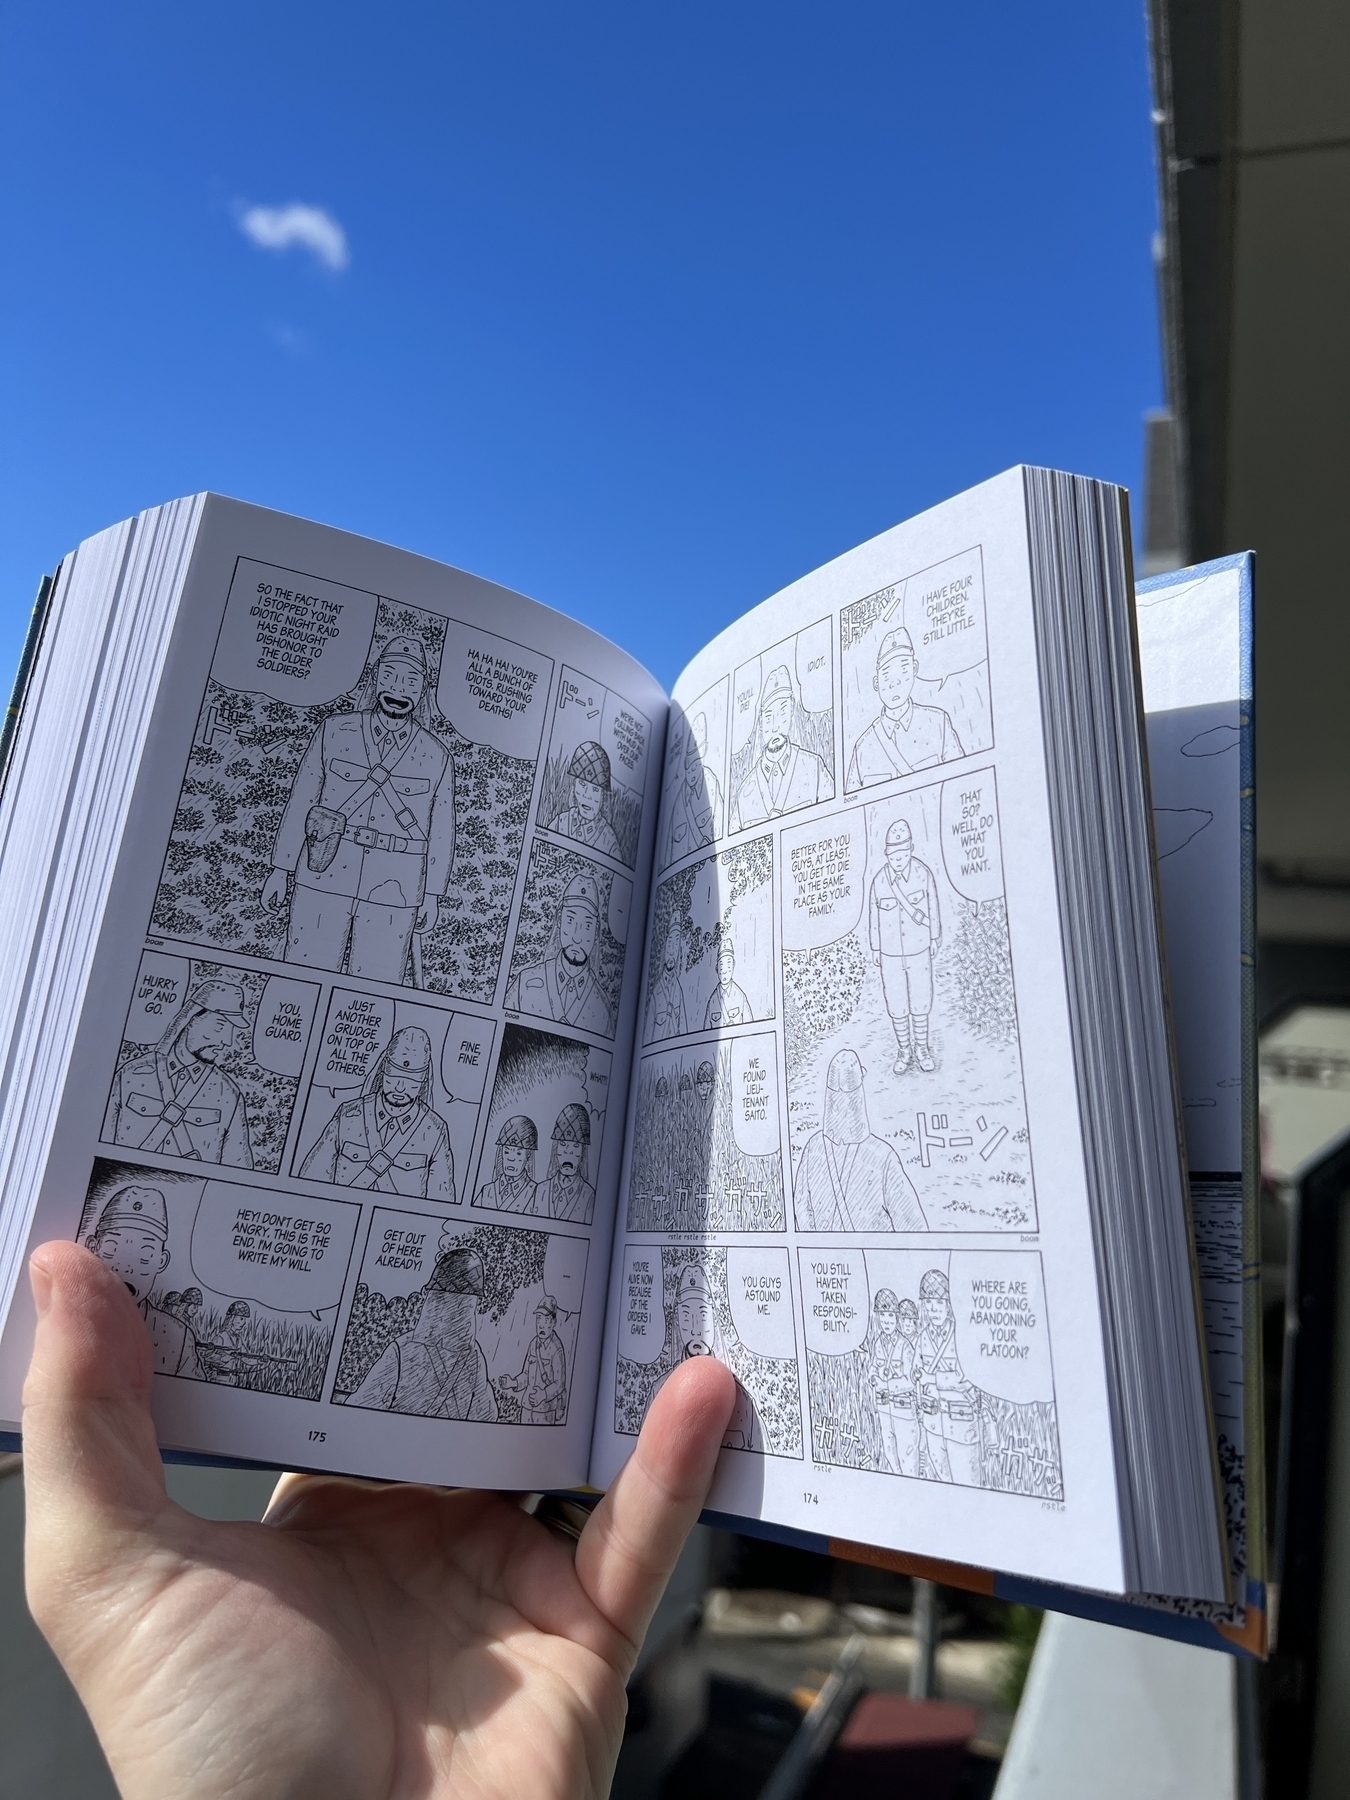 Sample pages from inside the book